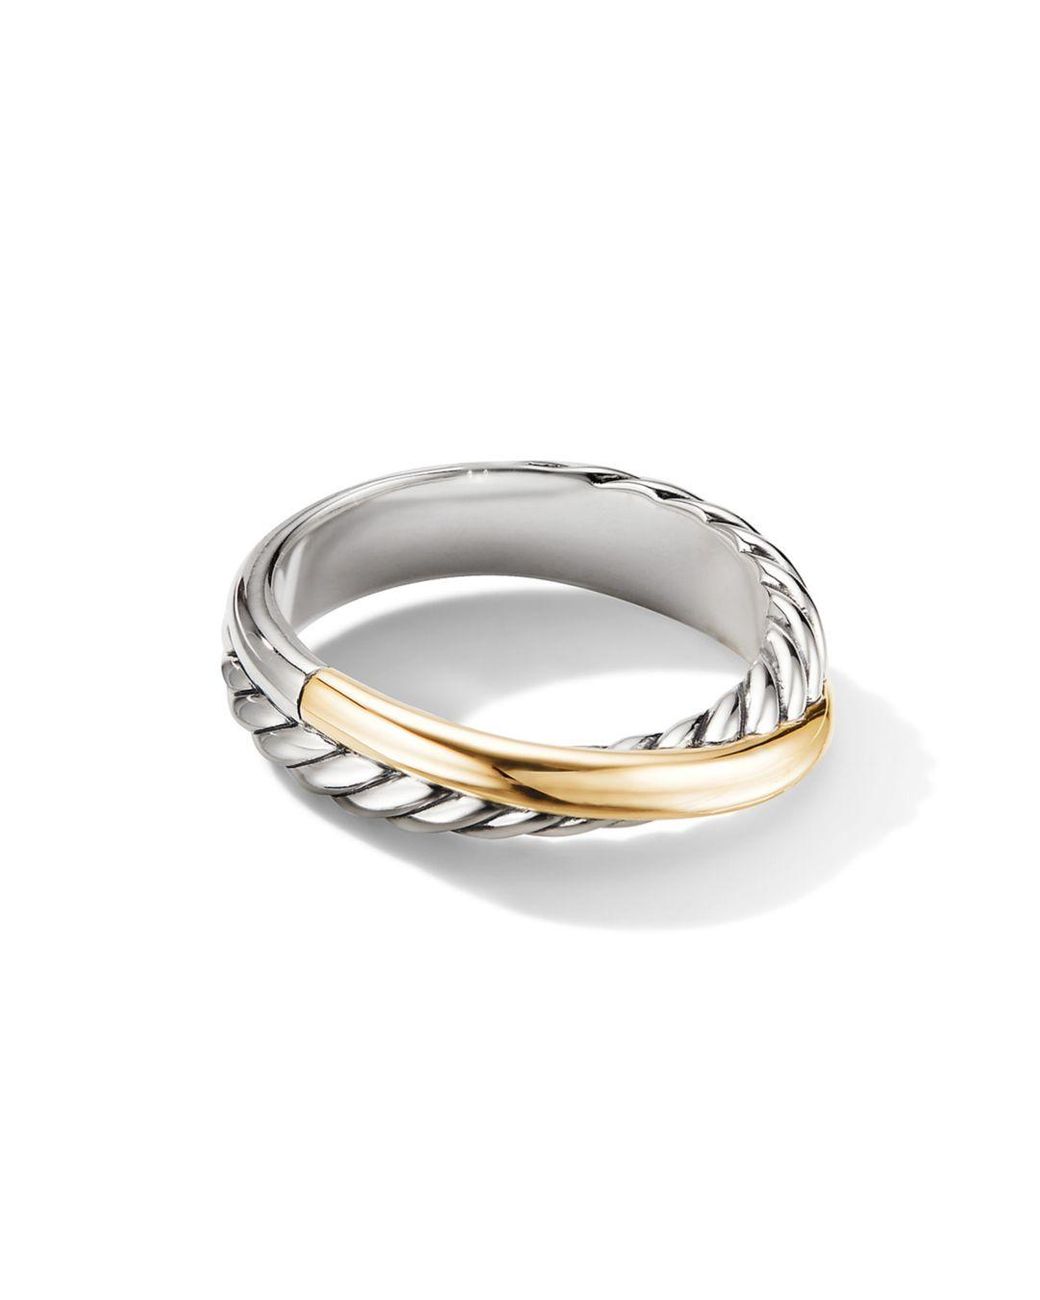 David Yurman Sterling Silver 925 14k Gold Narrow Crossover 14mm Width Cable Ring